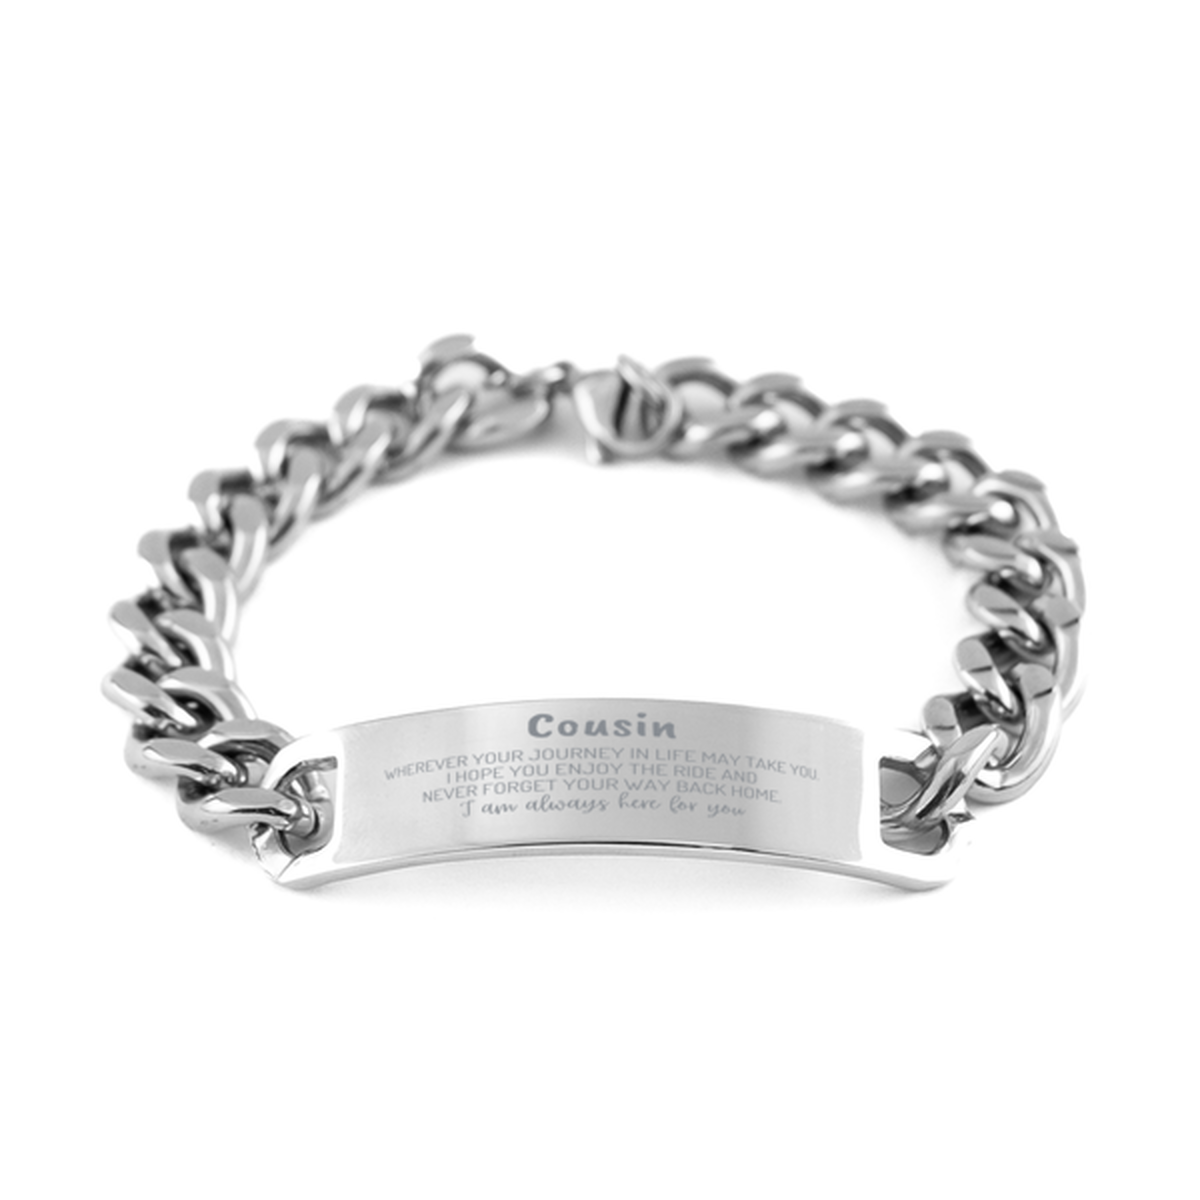 Cousin wherever your journey in life may take you, I am always here for you Cousin Cuban Chain Stainless Steel Bracelet, Awesome Christmas Gifts For Cousin, Cousin Birthday Gifts for Men Women Family Loved One